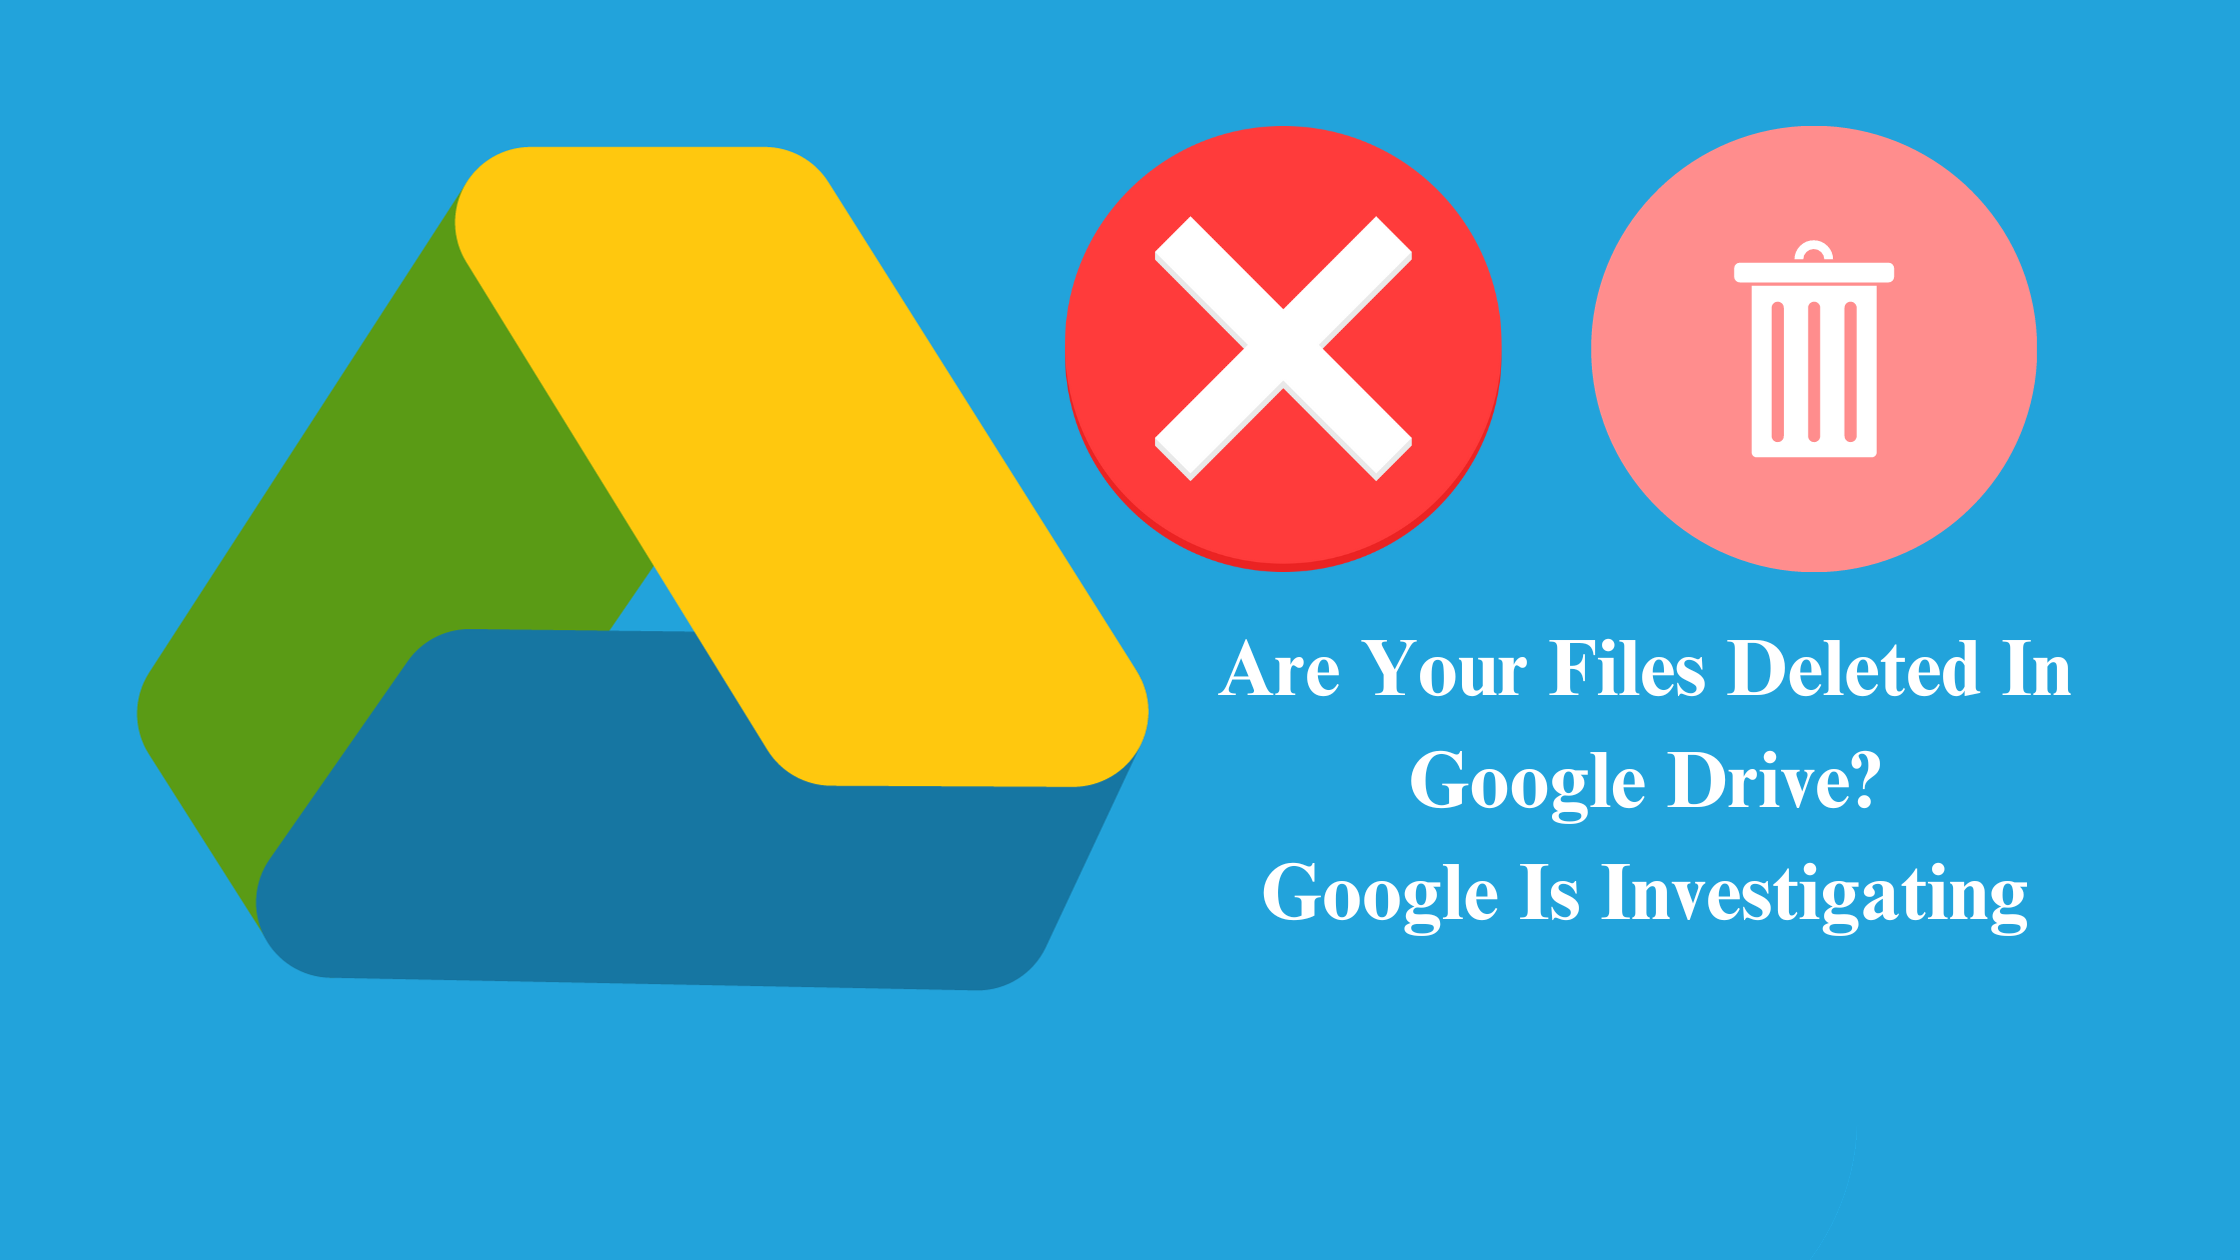 Google is investigating recent file deletion from Google Drive